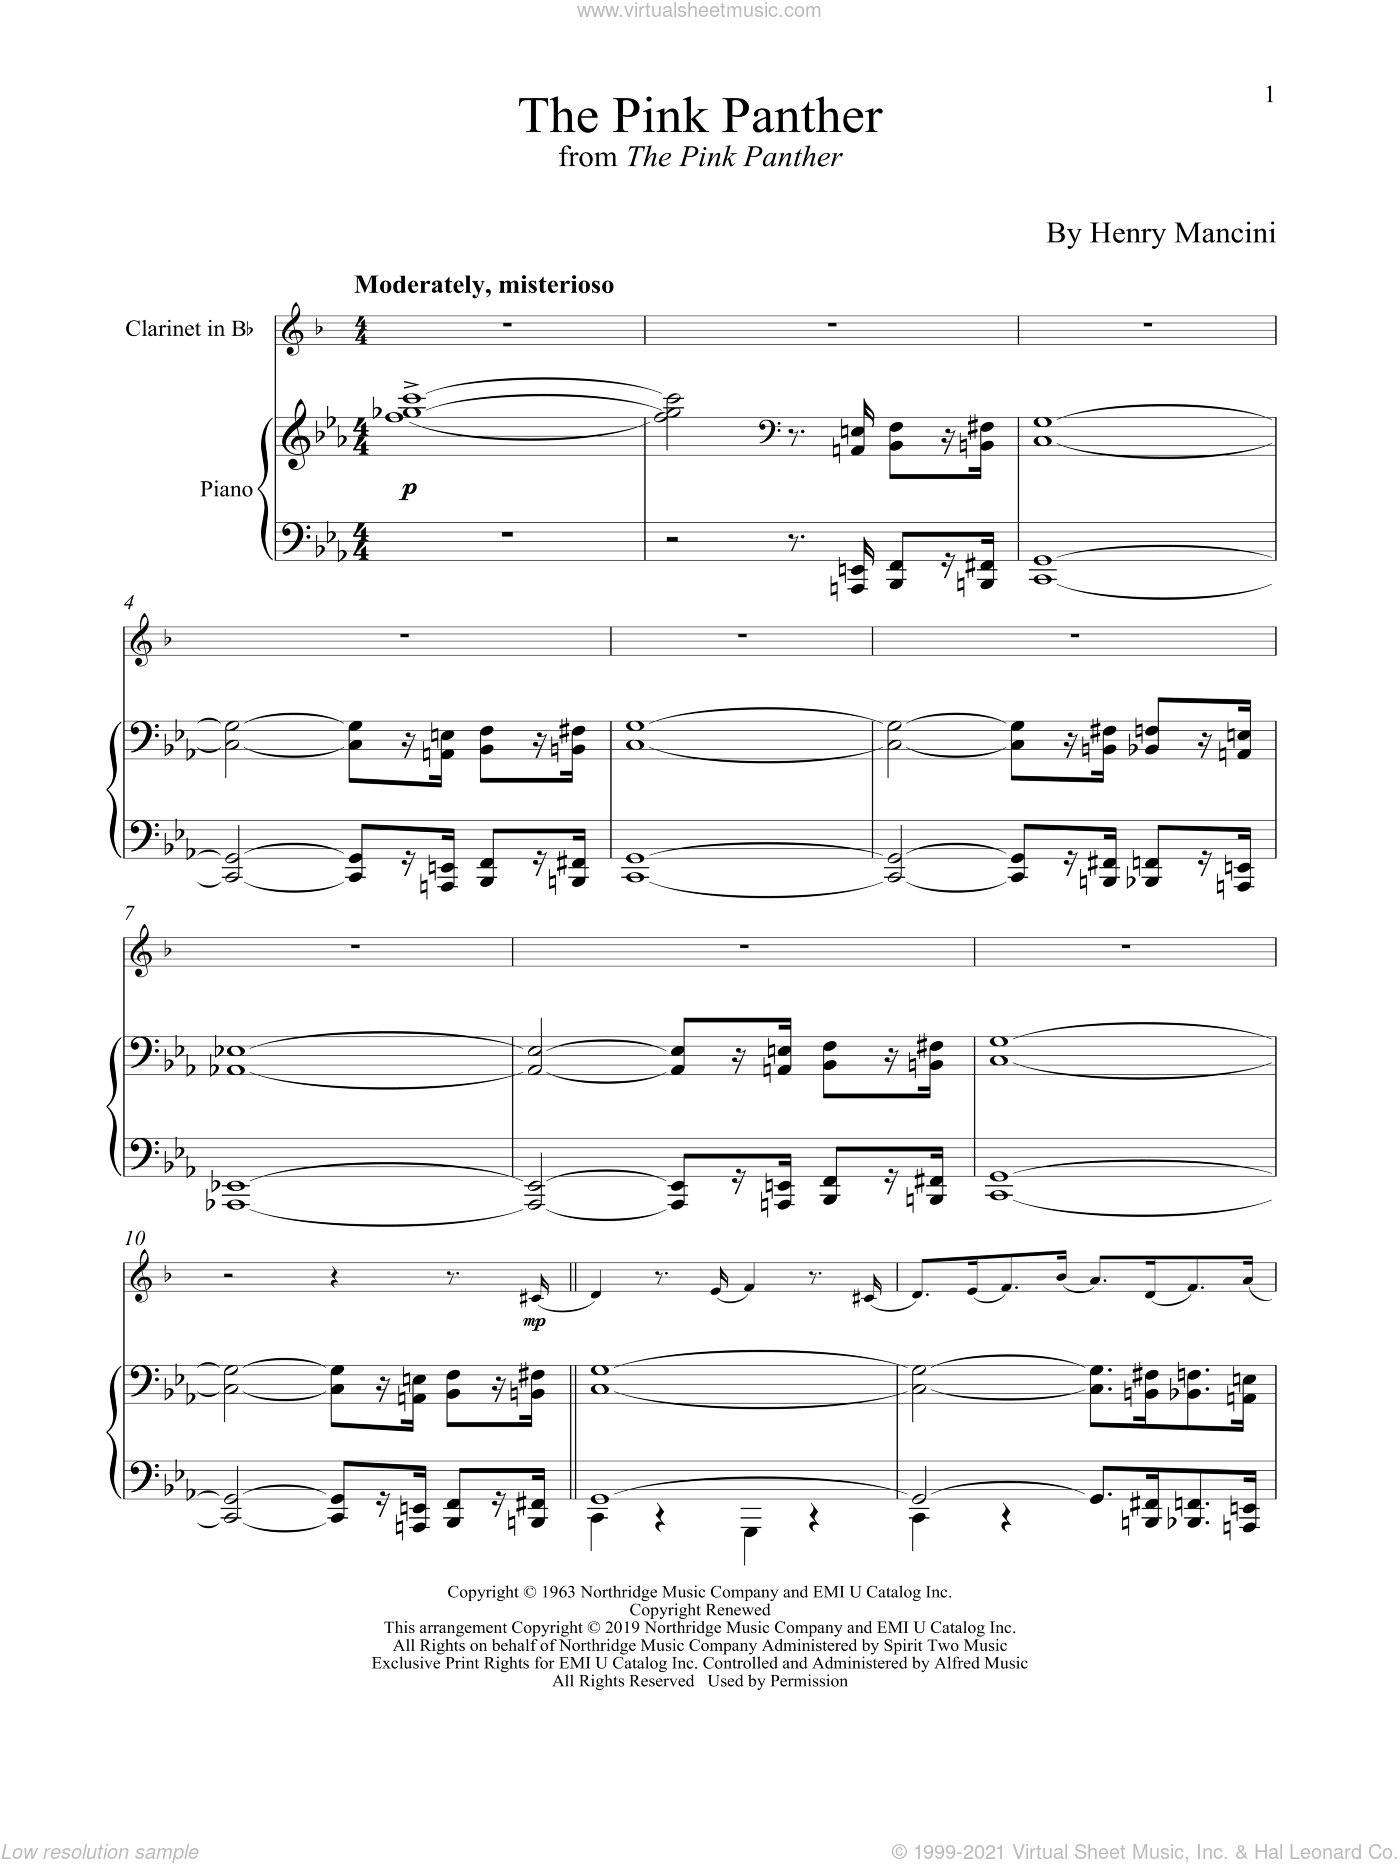 Download & Print The Pink Panther for clarinet and piano by Henry Manci...